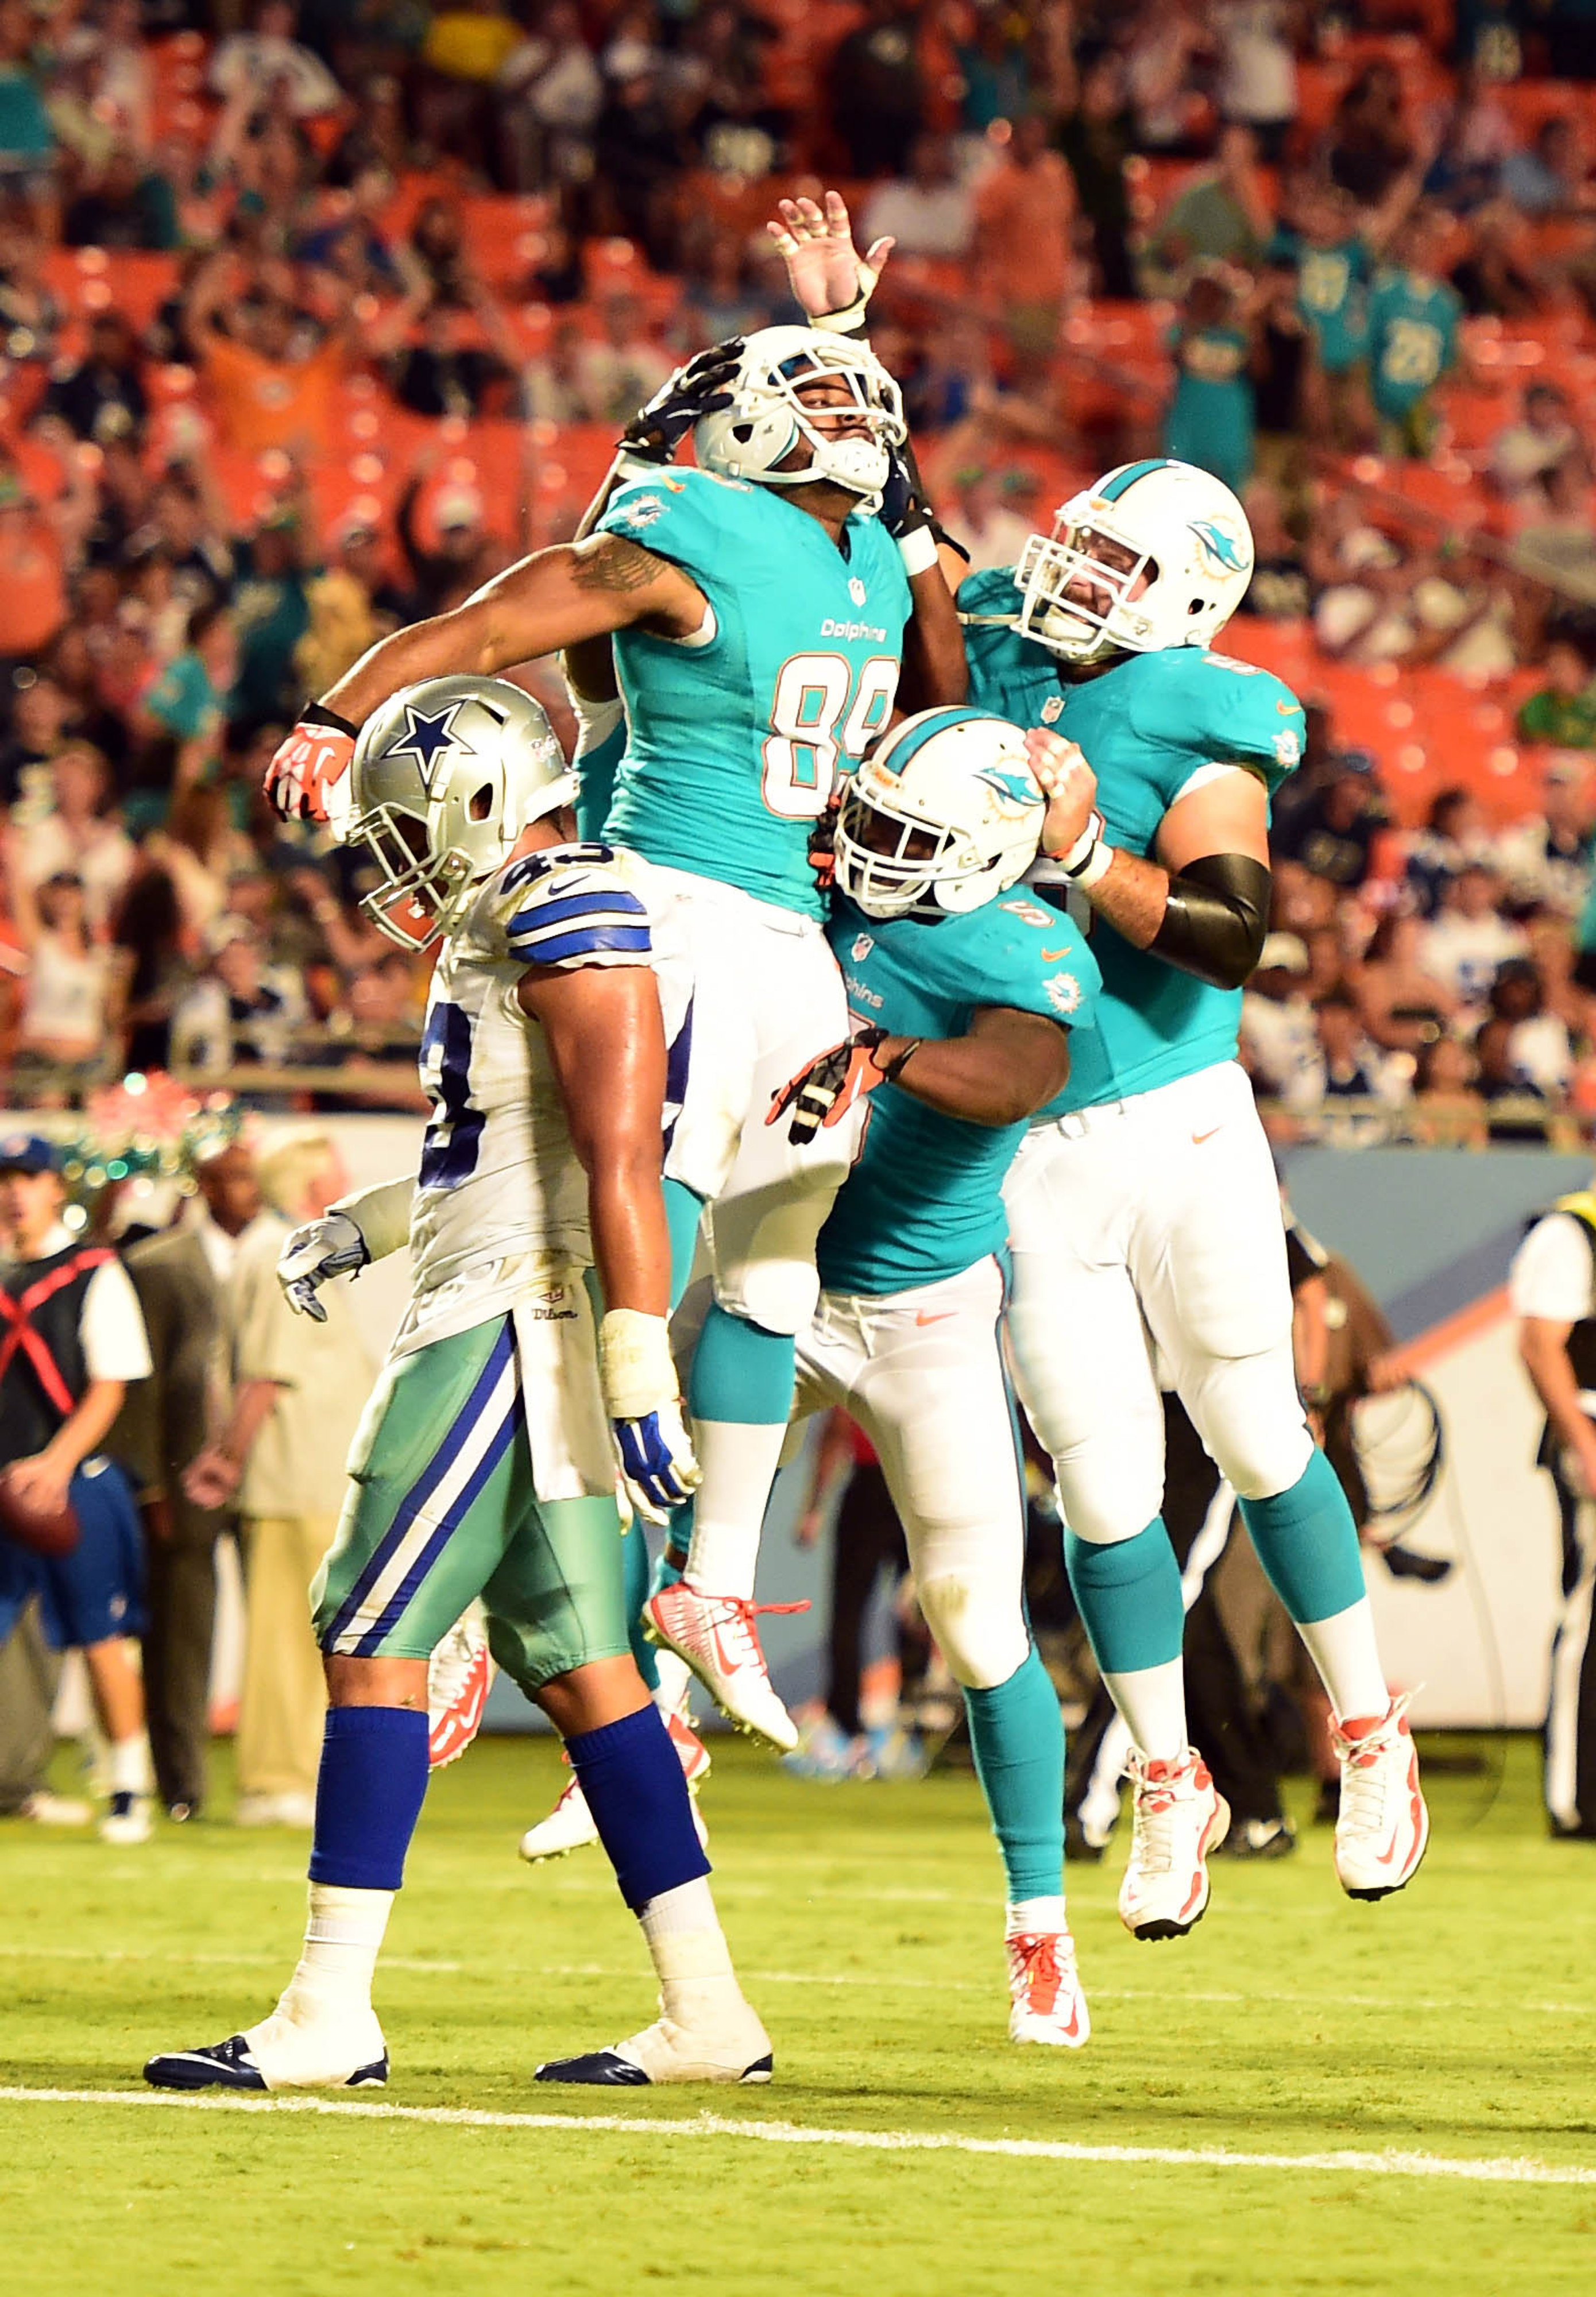 Gator Hoskins celebrating his first NFL reception and touchdown